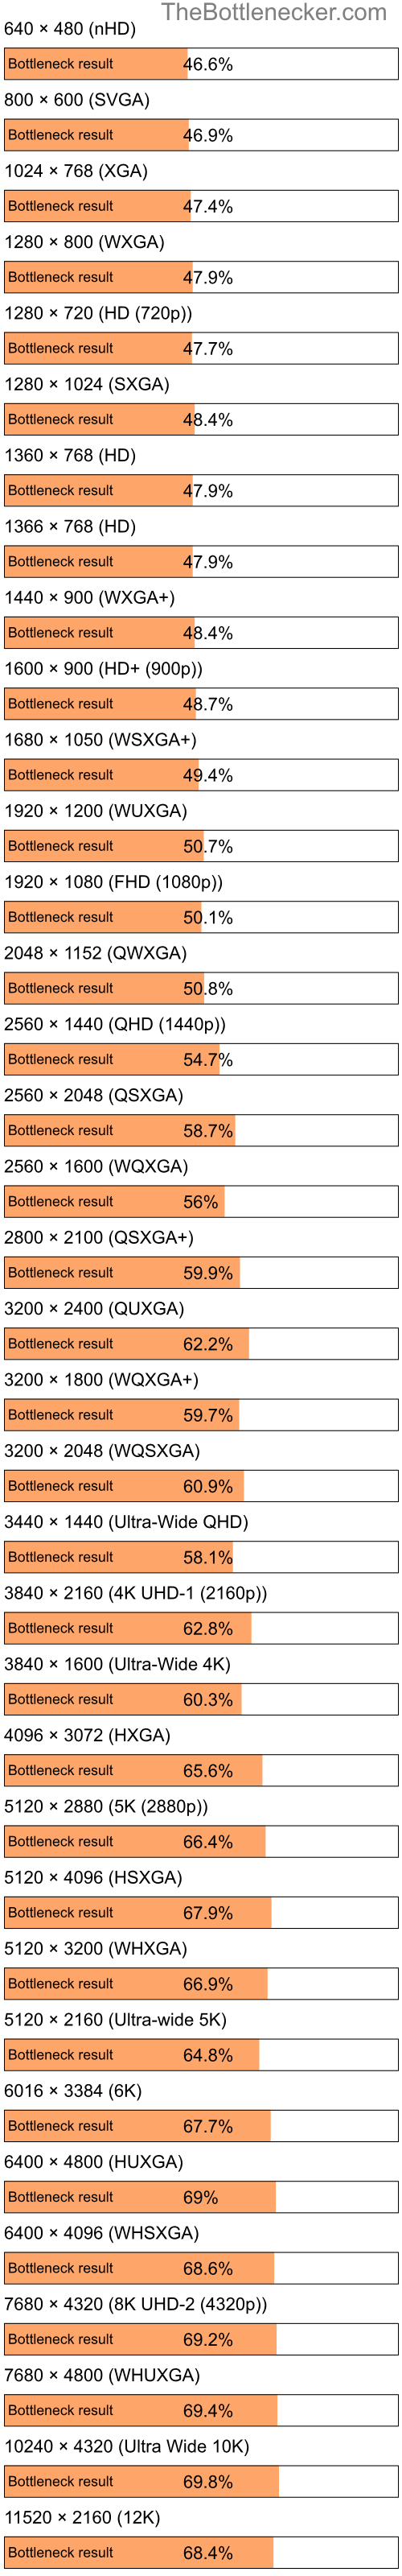 Bottleneck results by resolution for AMD Ryzen Threadripper PRO 7995WX and NVIDIA GeForce GTX 1650 in General Tasks